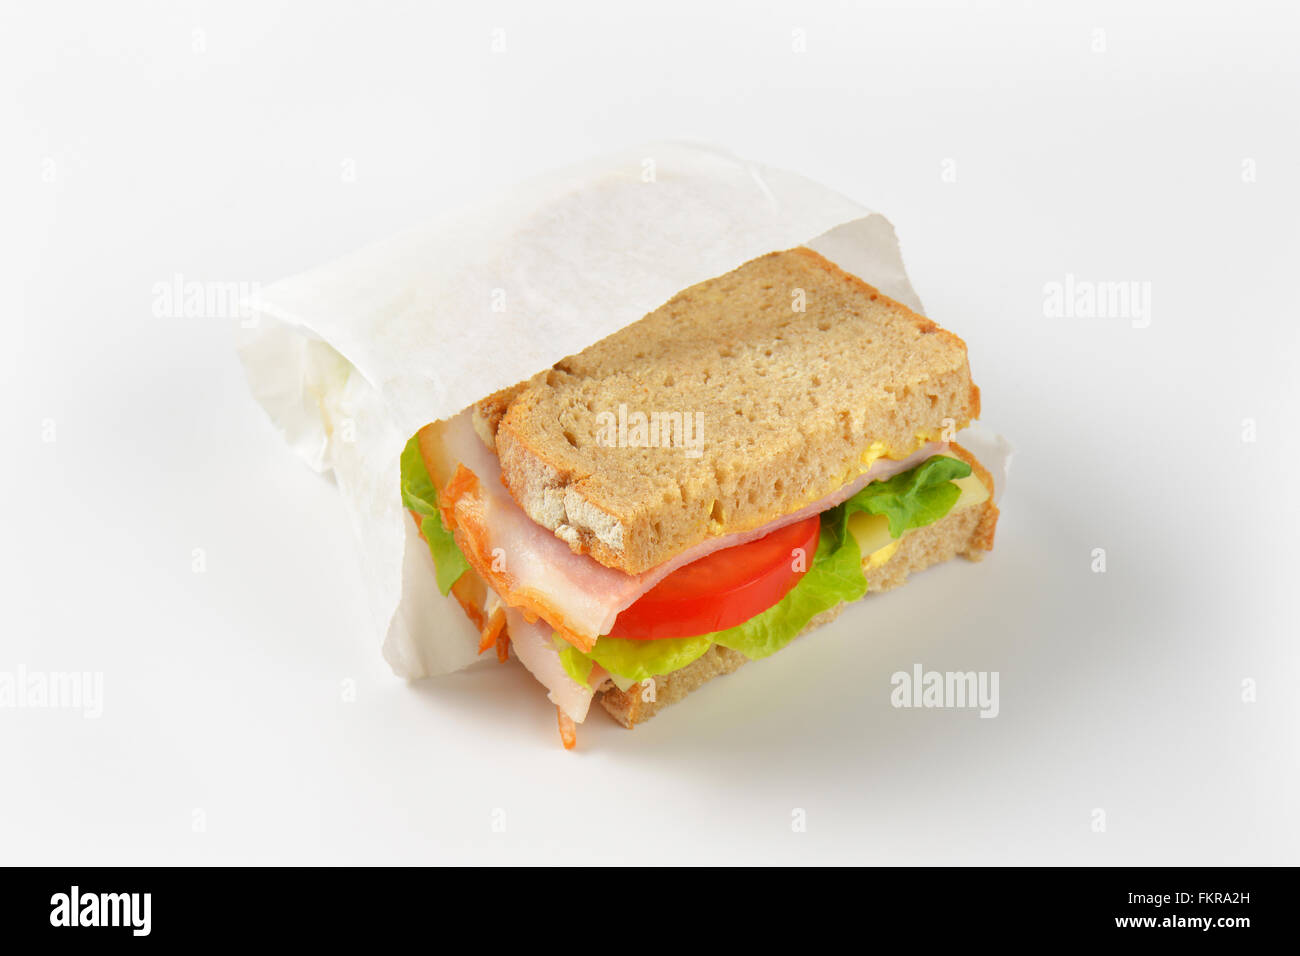 https://c8.alamy.com/comp/FKRA2H/fresh-sandwich-with-ham-cheese-and-vegetables-in-paper-bag-FKRA2H.jpg